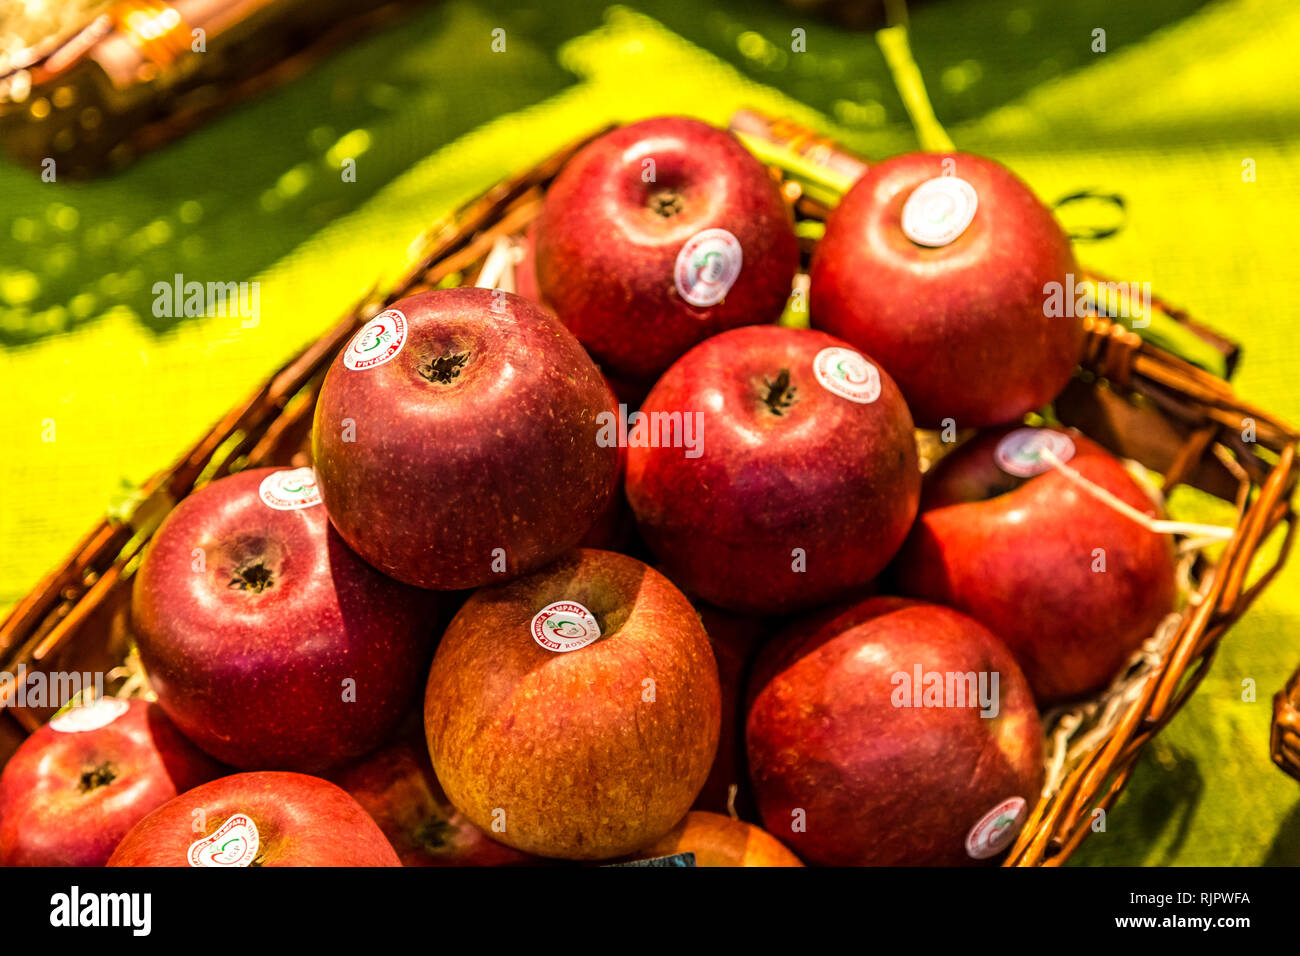 BOLOGNA, ITALY - DECEMBER 16, 2018: lights are enlightening MELANURCA CAMPANA IGP apples at FICO Eataly World, the largest gourmet agri-food park in t Stock Photo